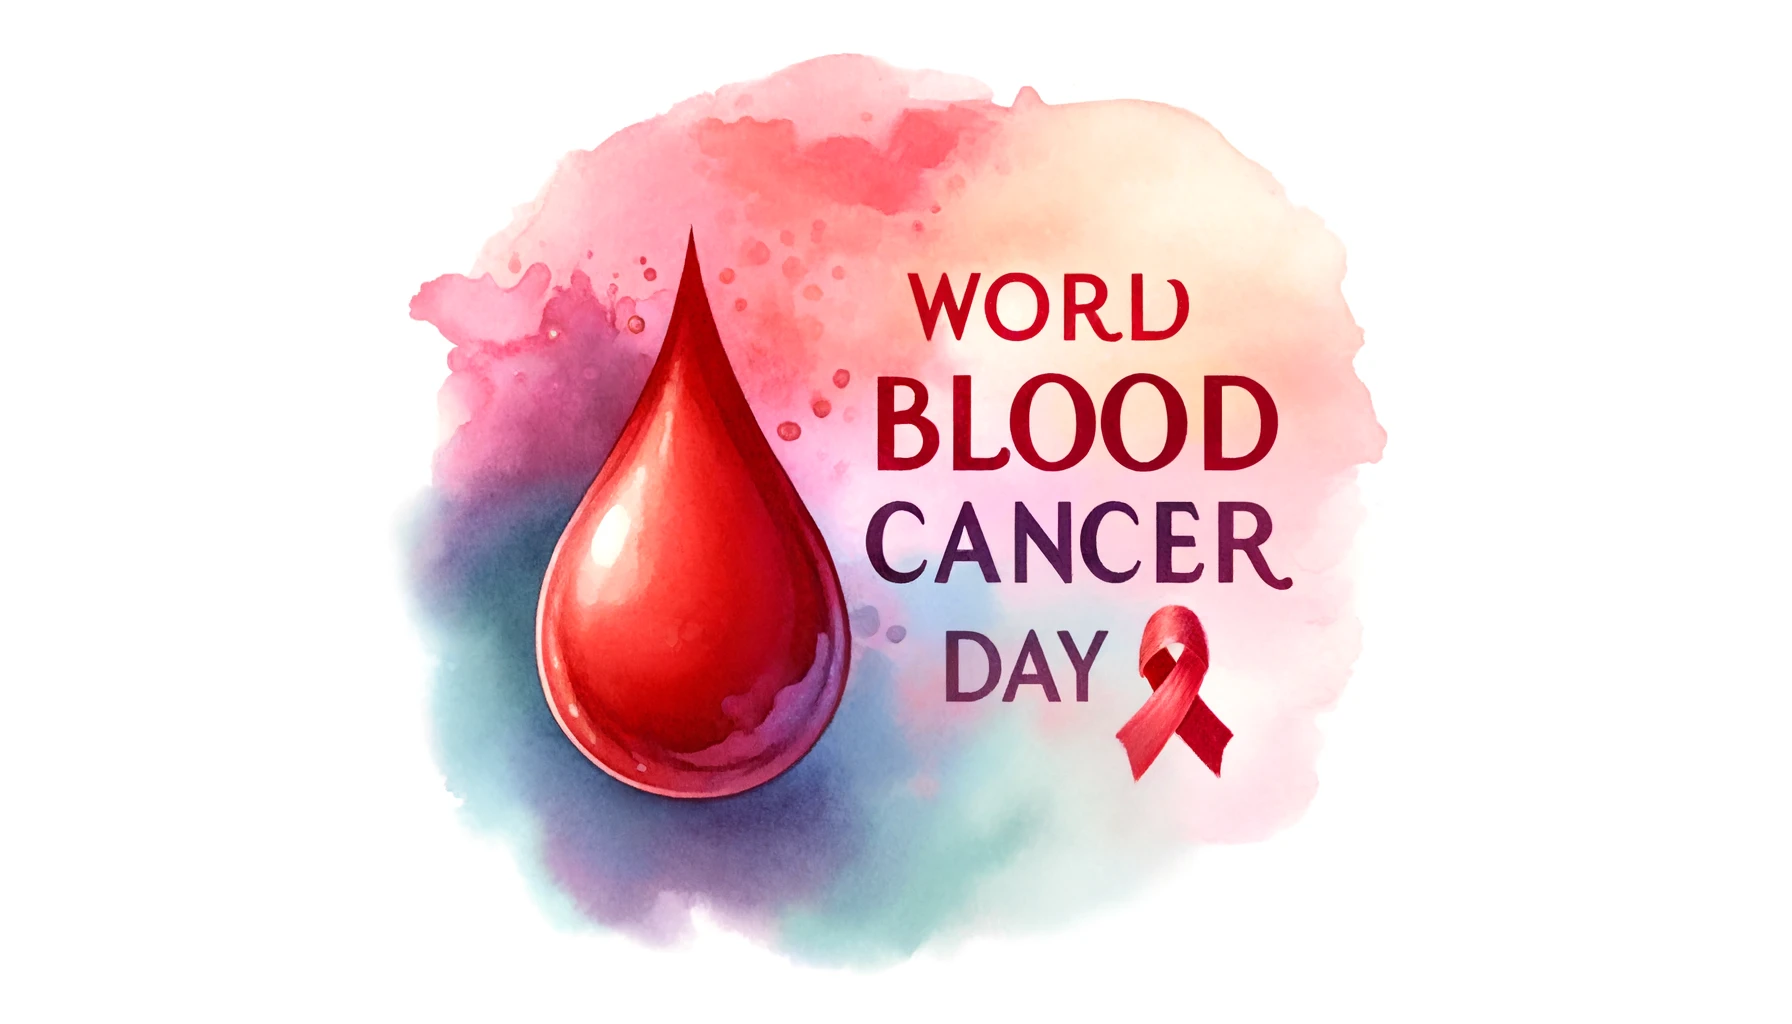 Unite to Fight: Raising Awareness on World Blood Cancer Day